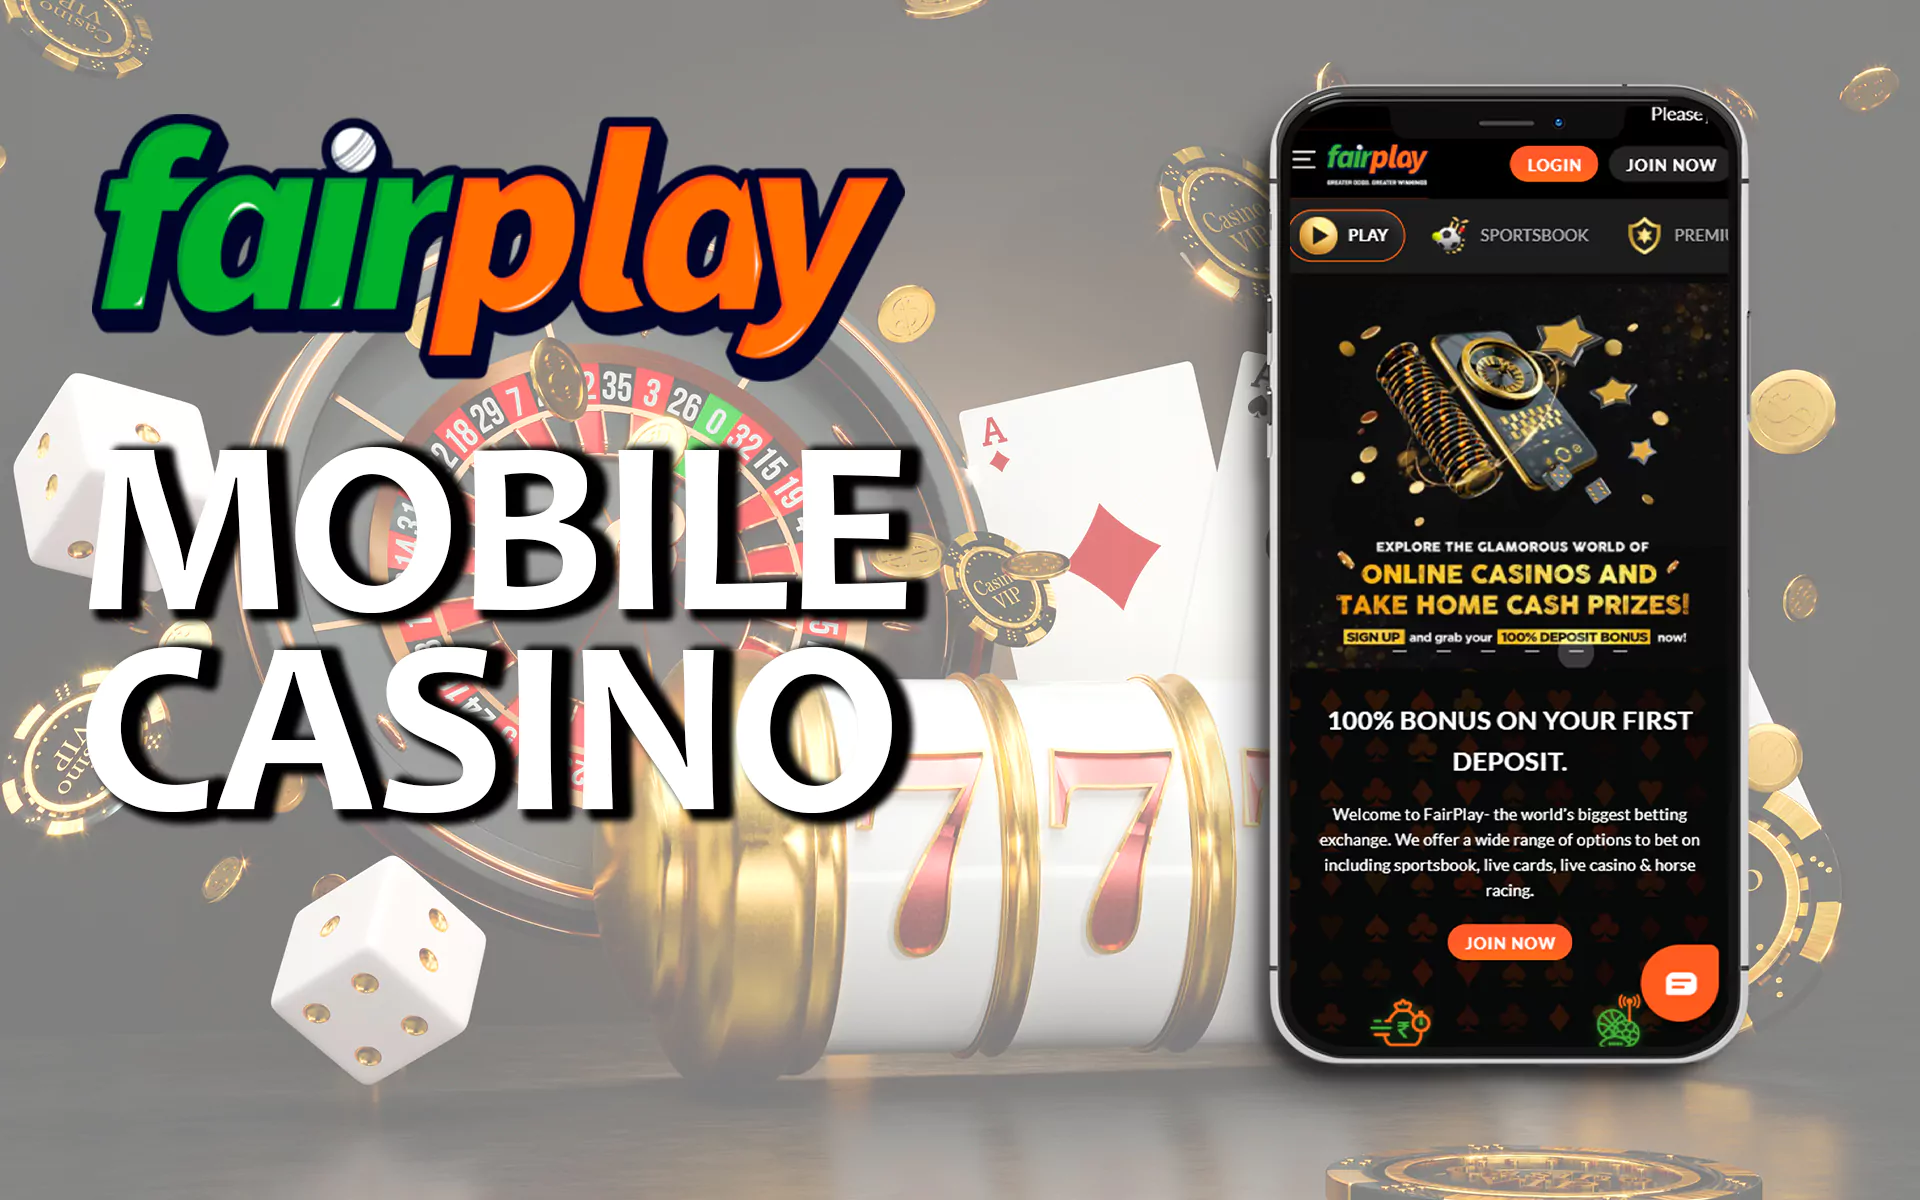 You can play live casino right in the Fairplay mobile app.